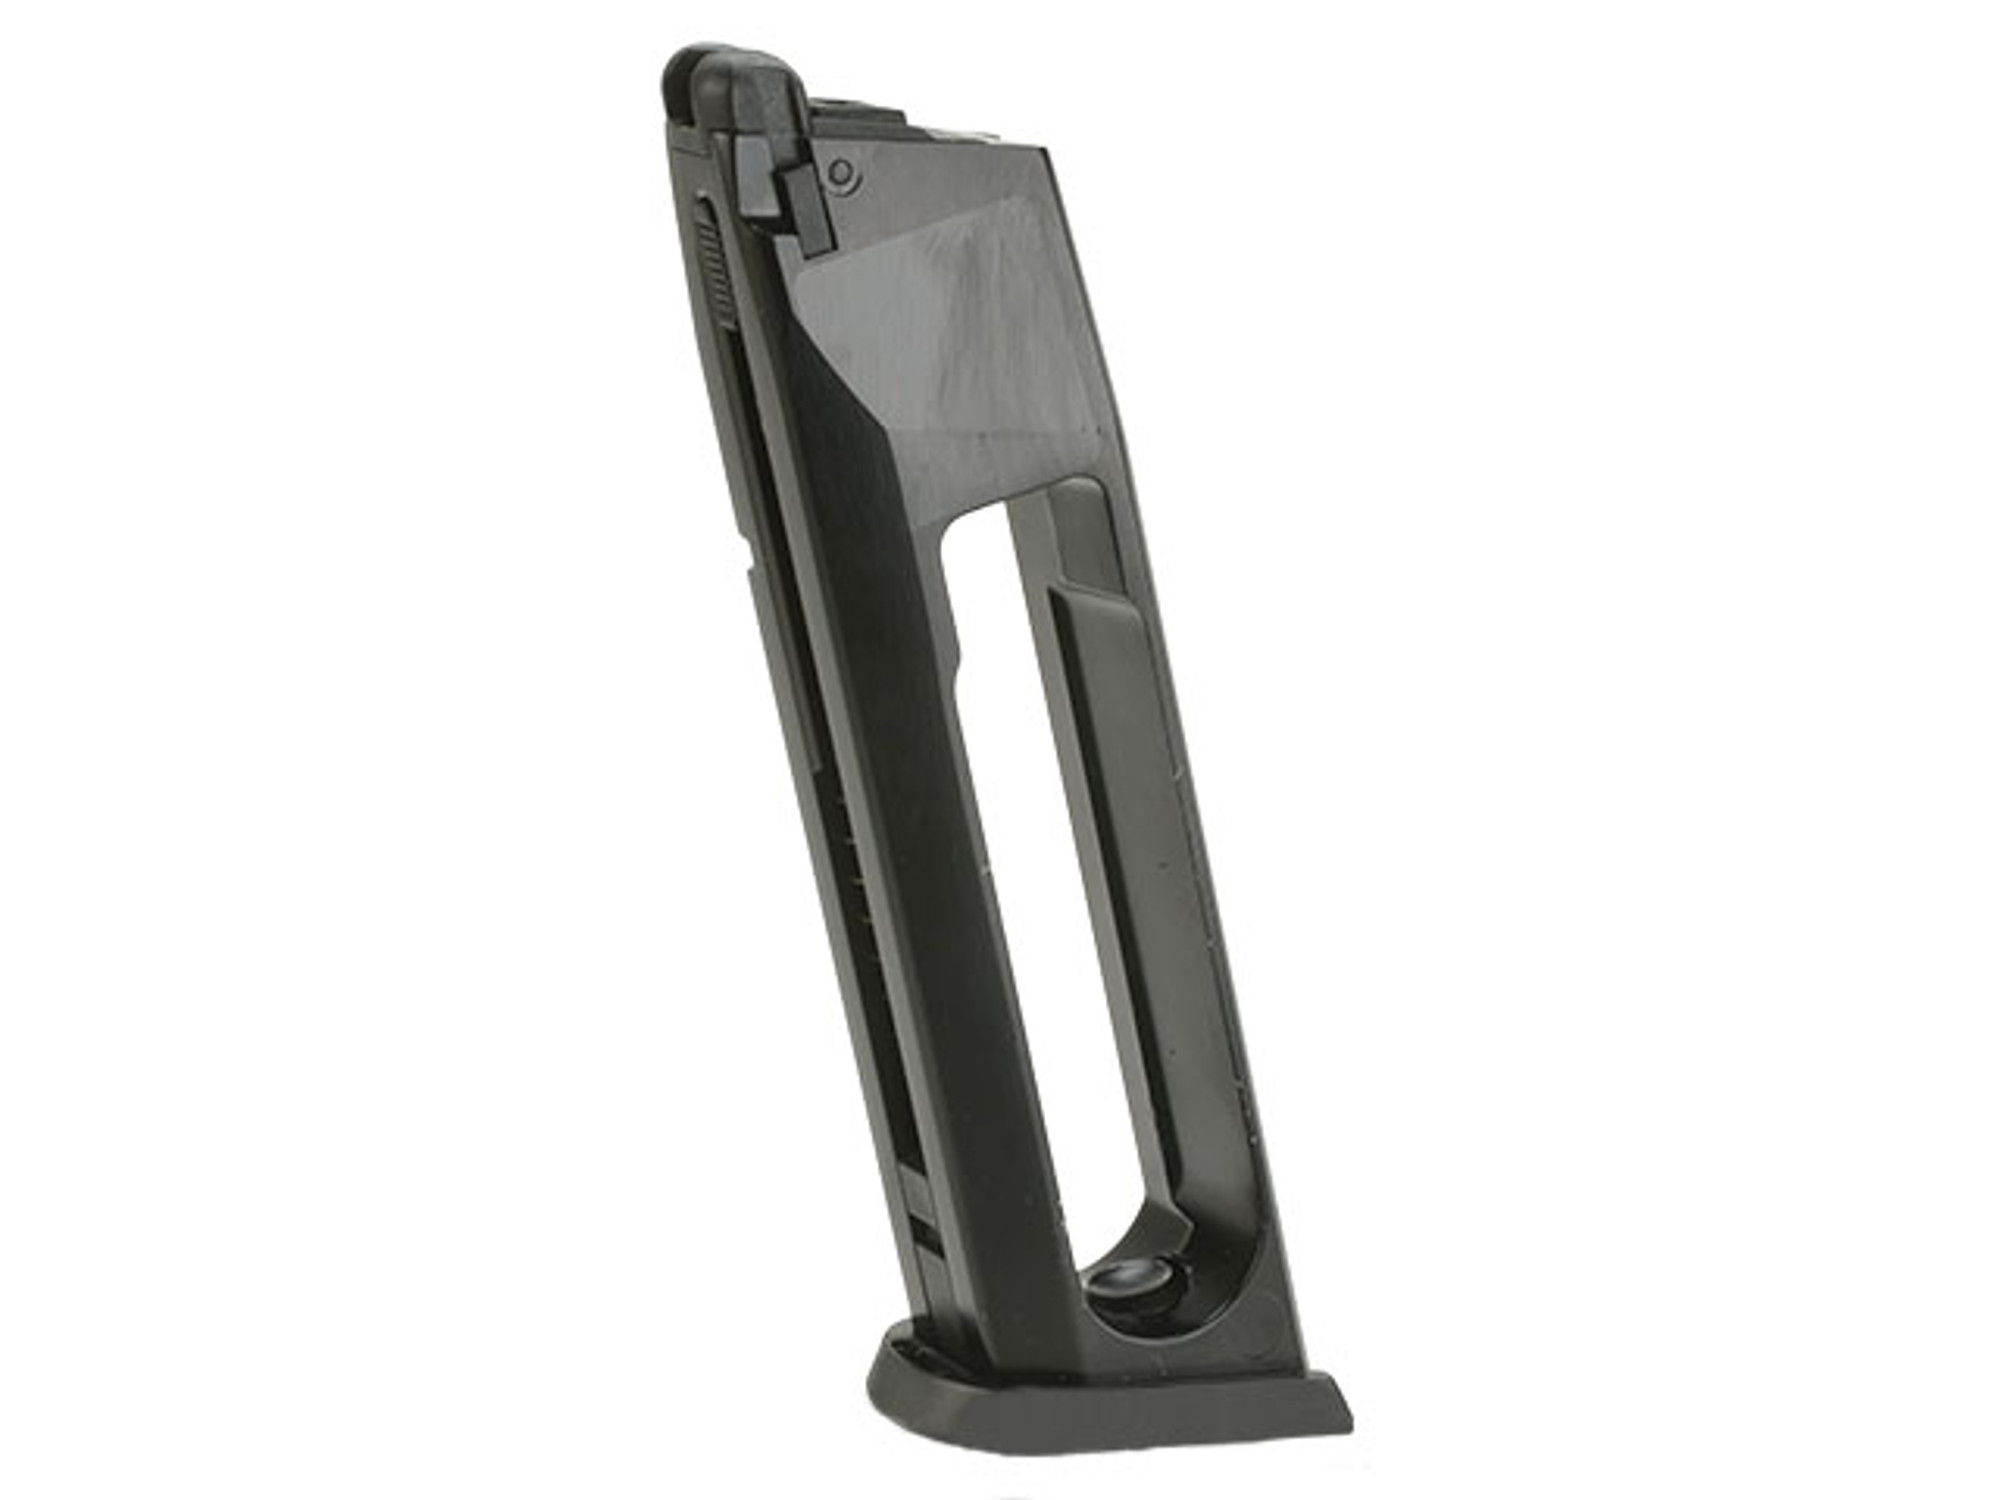 ASG CO2 Magazine for ASGKJW CZ-P09 Duty Gas Blowback Airsoft Pistol